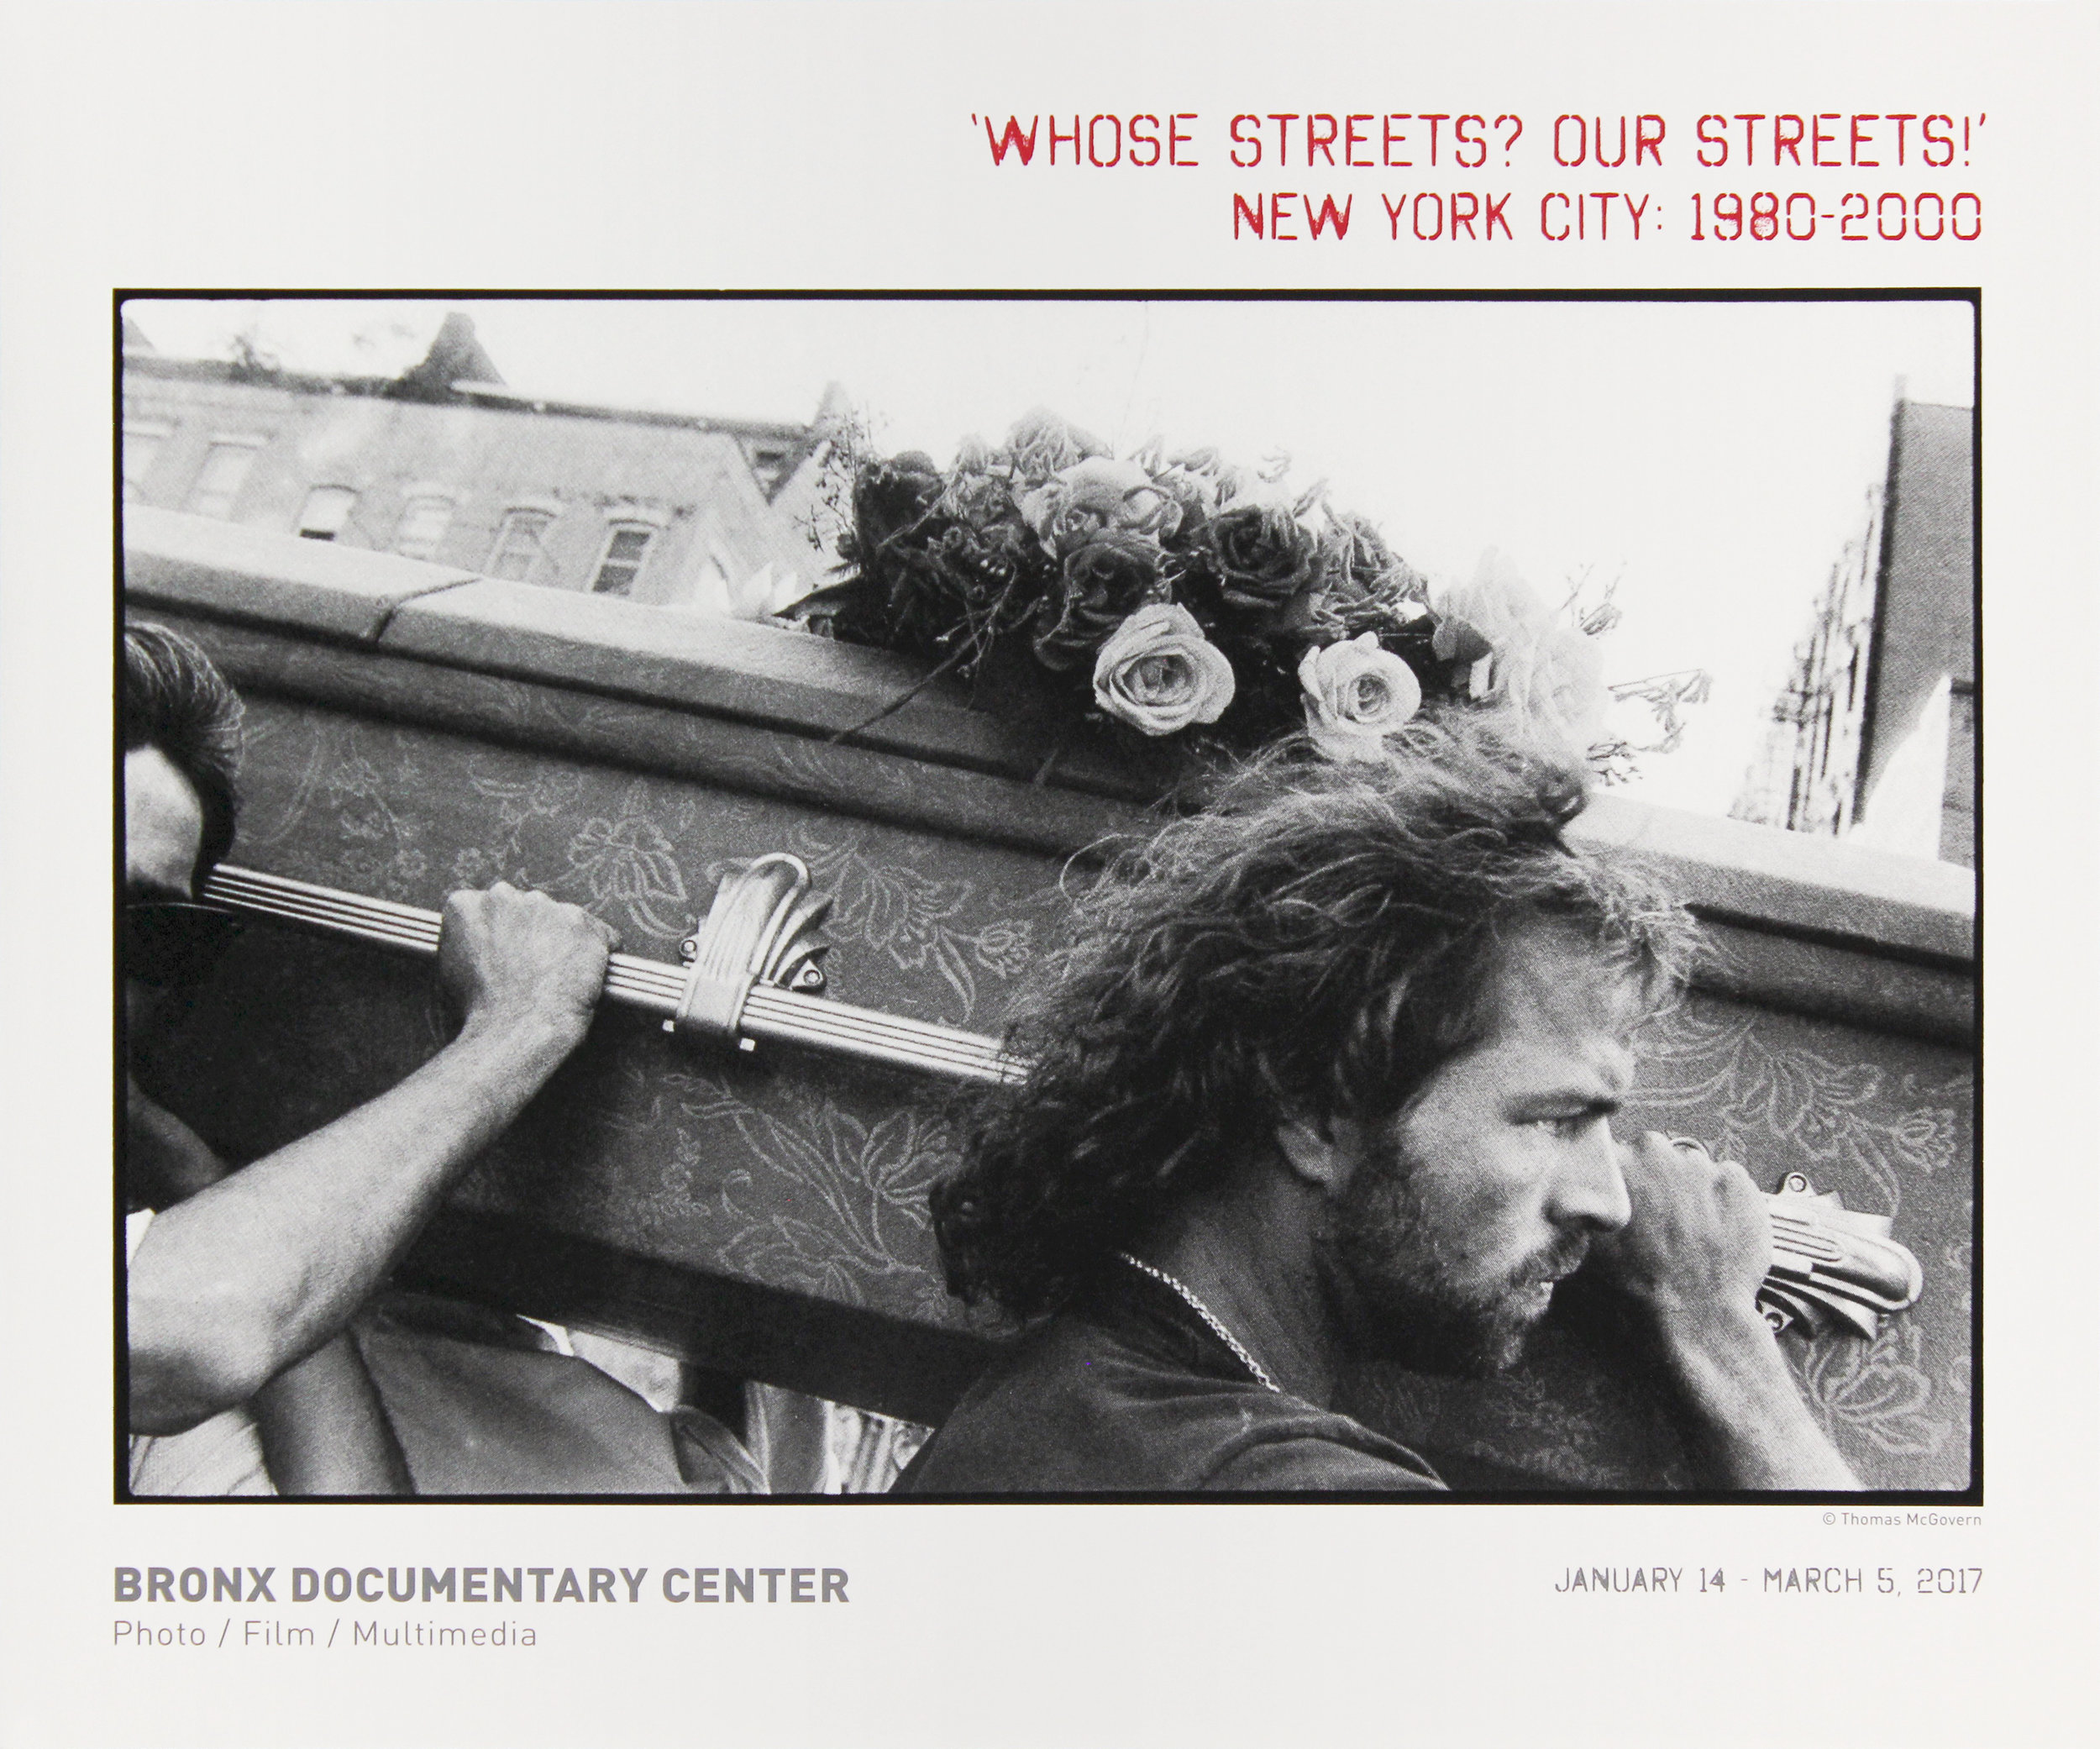 Bronx Doc Center - "Whose Streets? Our Streets!" New York CIty 1980-2000